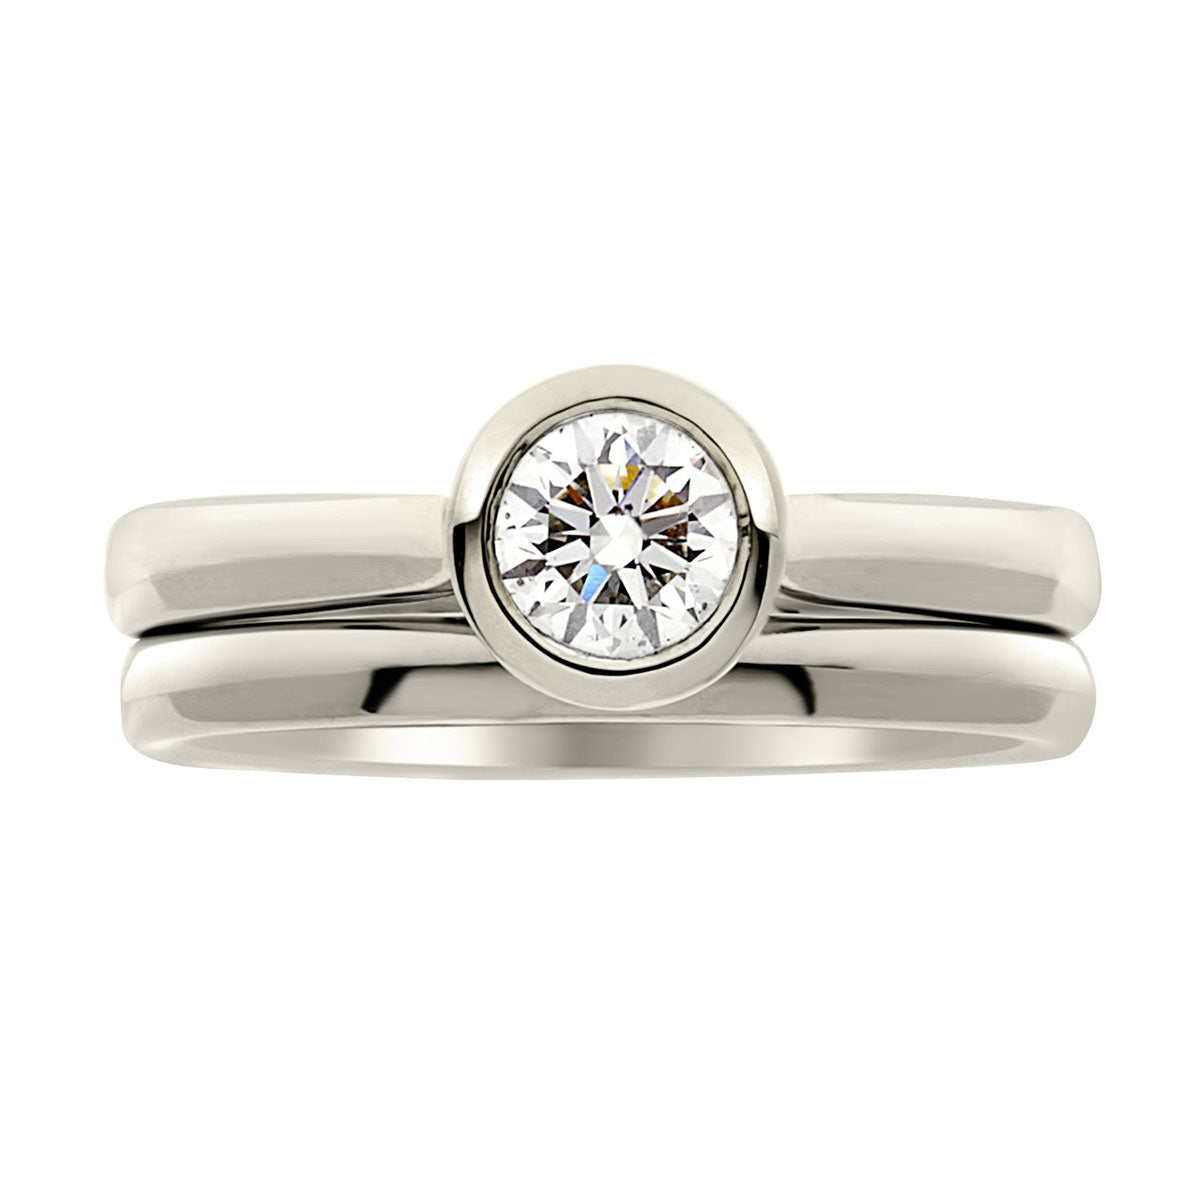 Bezel Set Engagement ring in white gold with a plain wedding ring